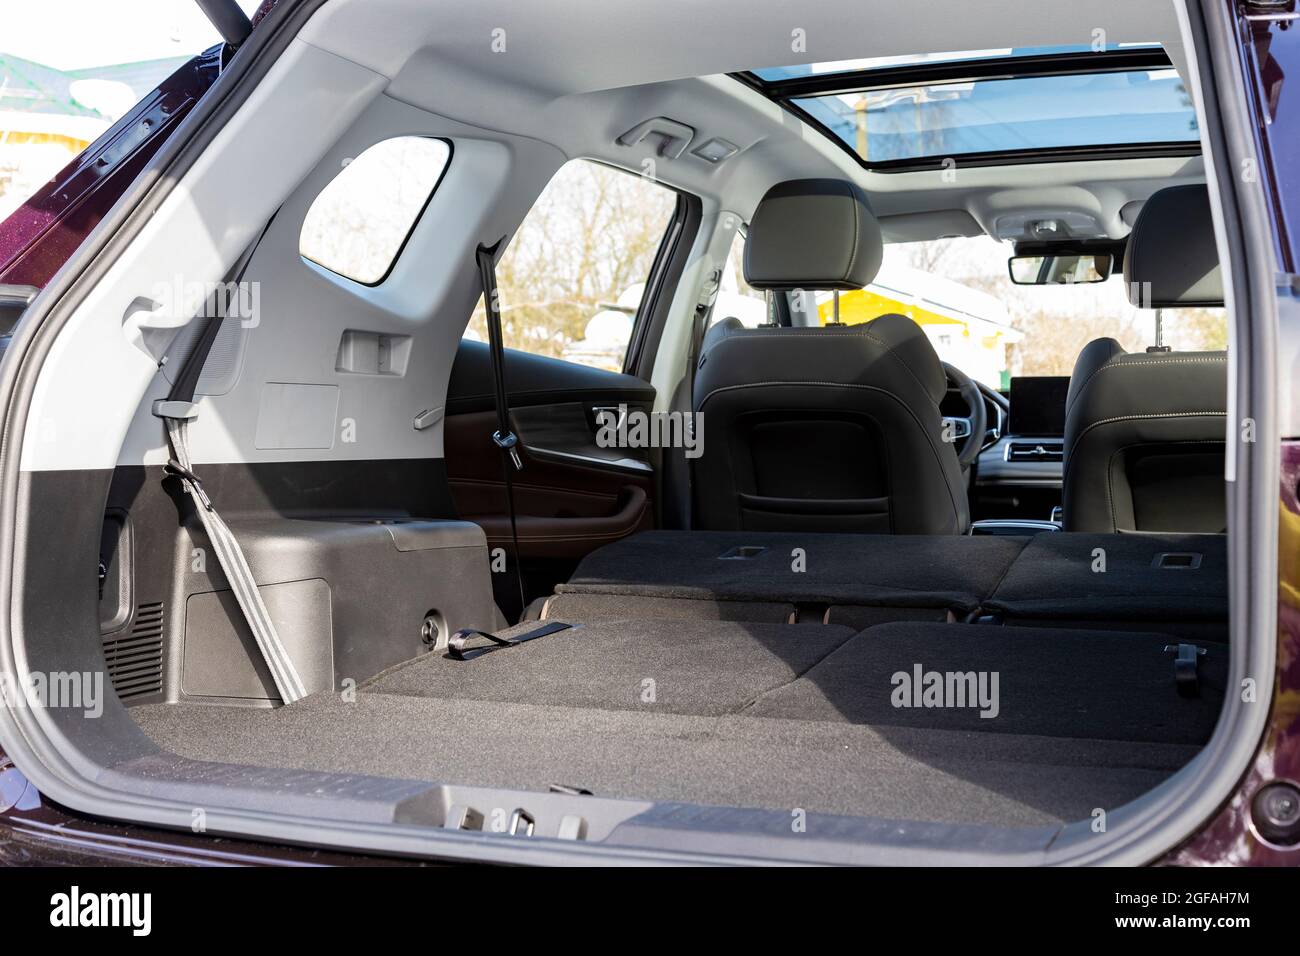 https://c8.alamy.com/comp/2GFAH7M/a-huge-car-interior-with-the-rear-seats-folded-down-large-luggage-compartment-of-a-family-car-car-folding-seats-and-large-volume-empty-car-trunk-and-2GFAH7M.jpg